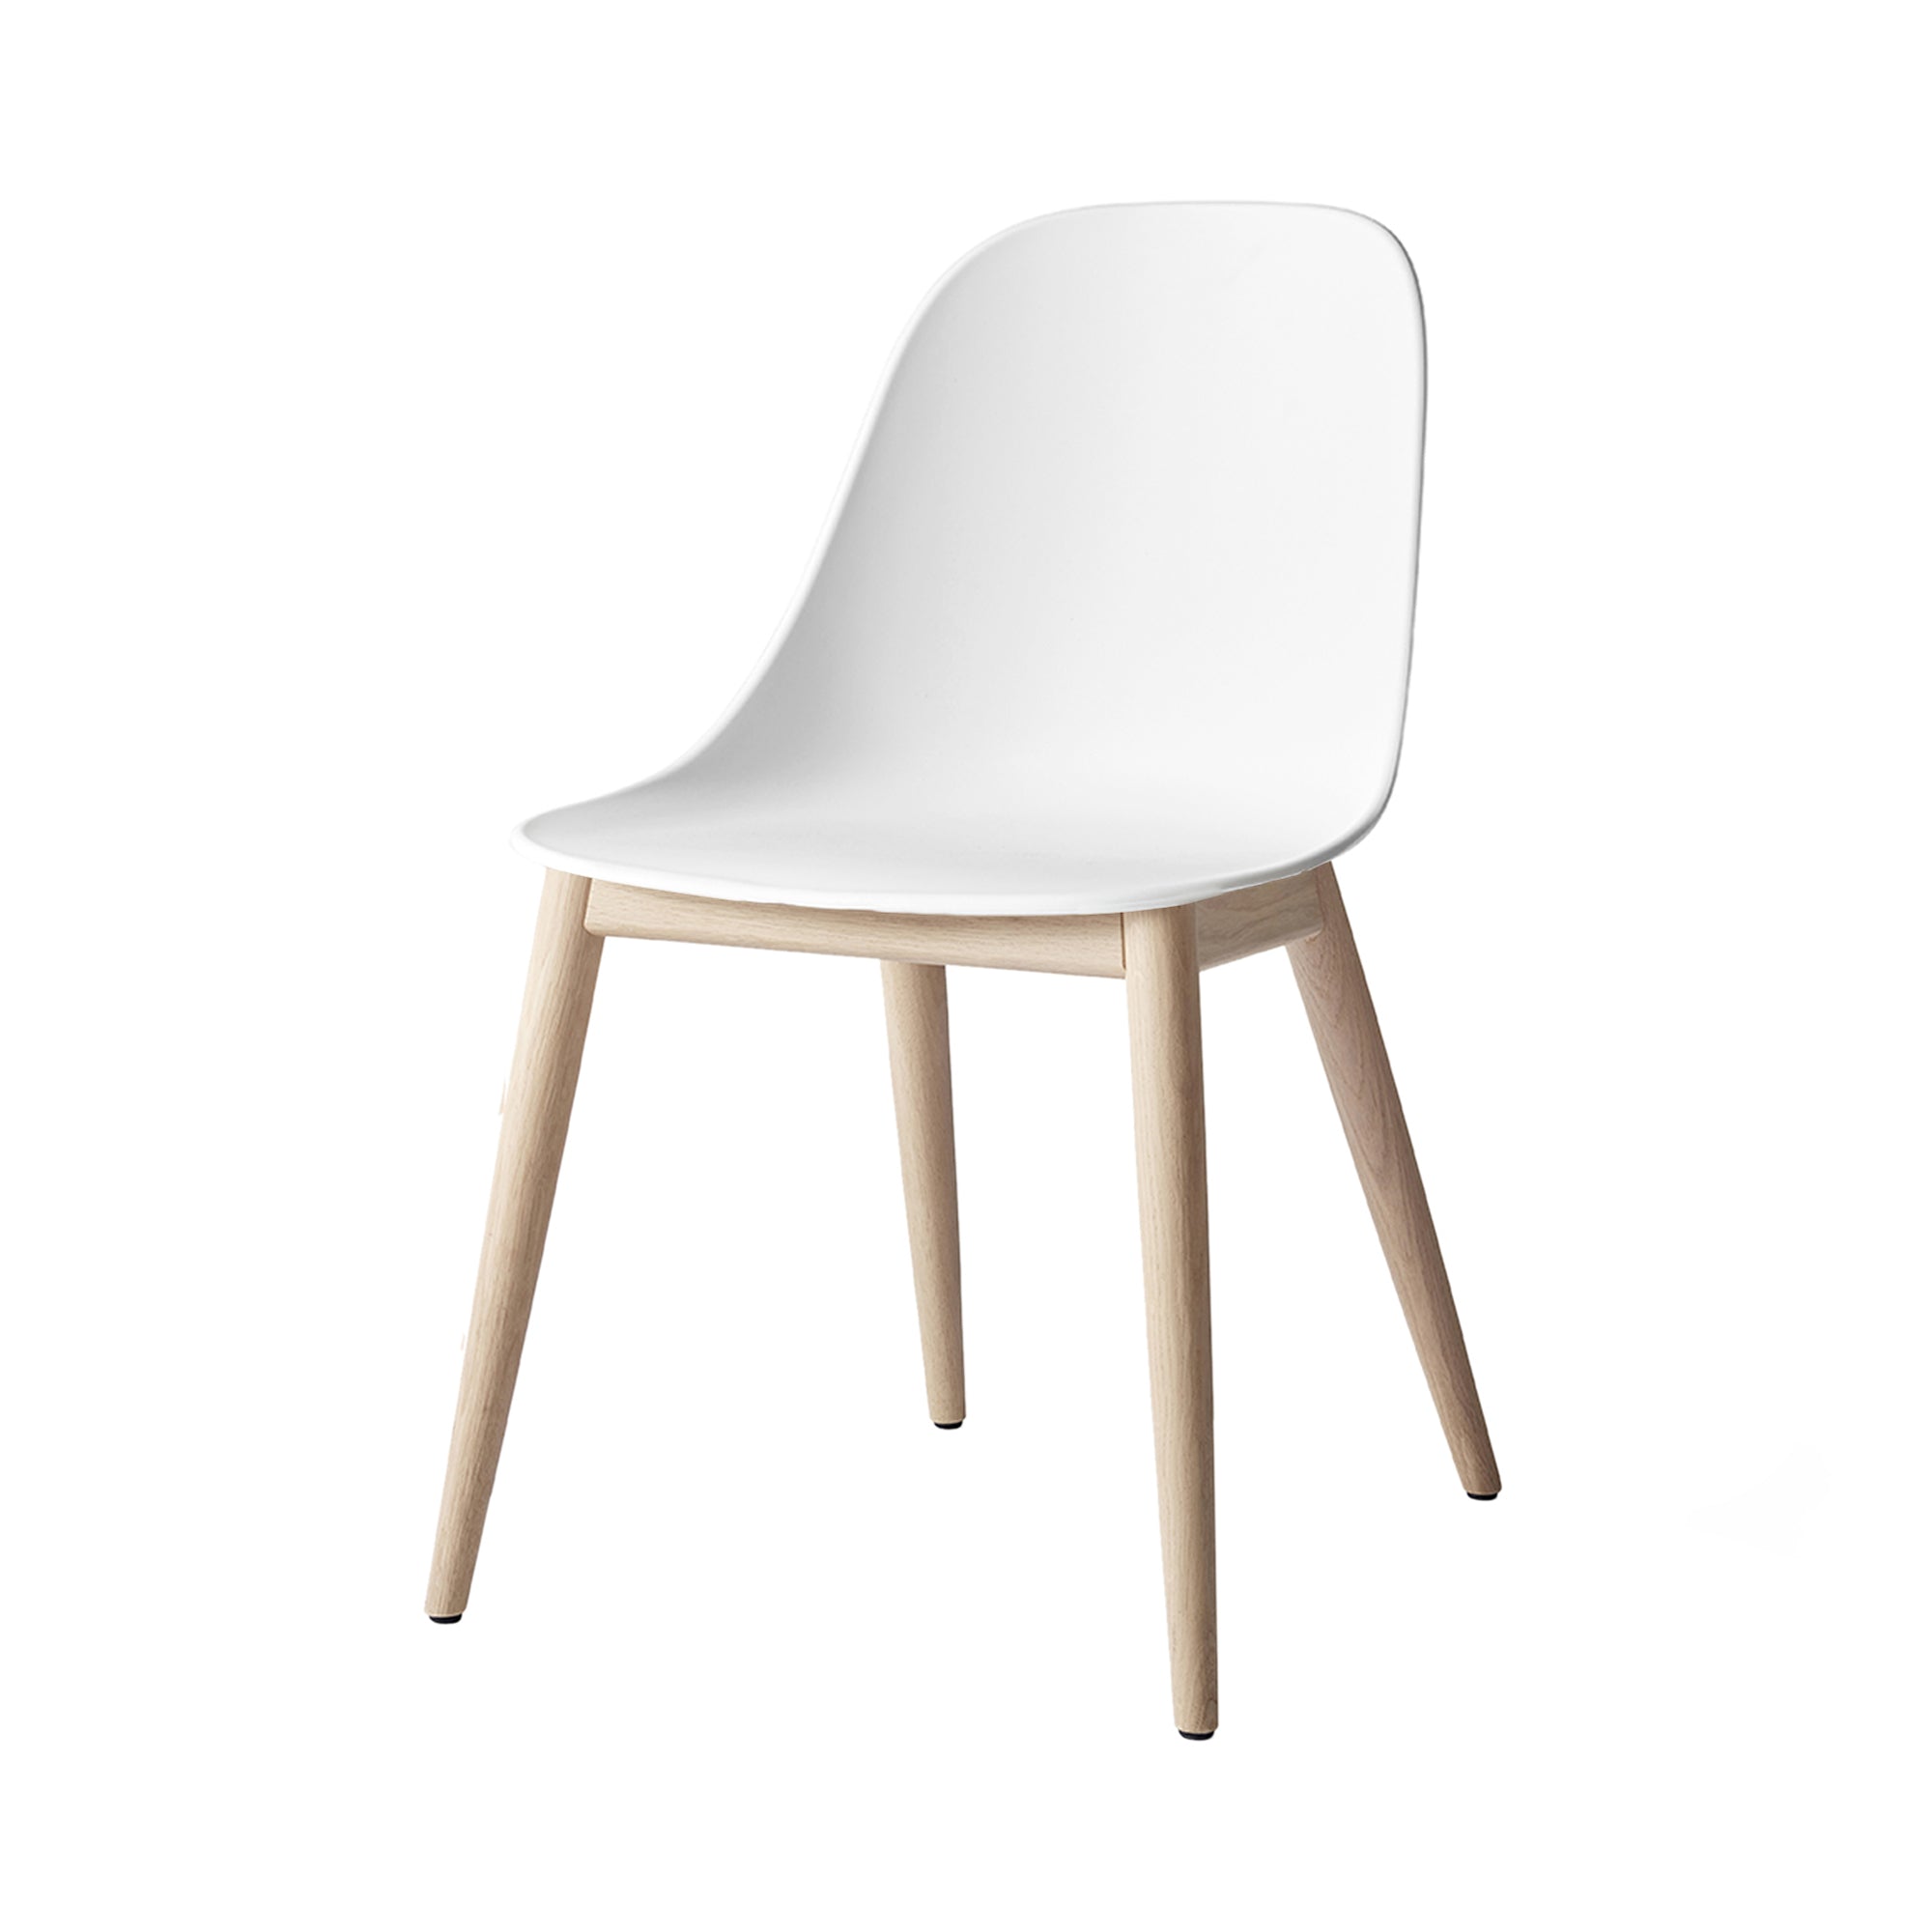 Harbour Side Chair: Wood Base + Natural Oak + White